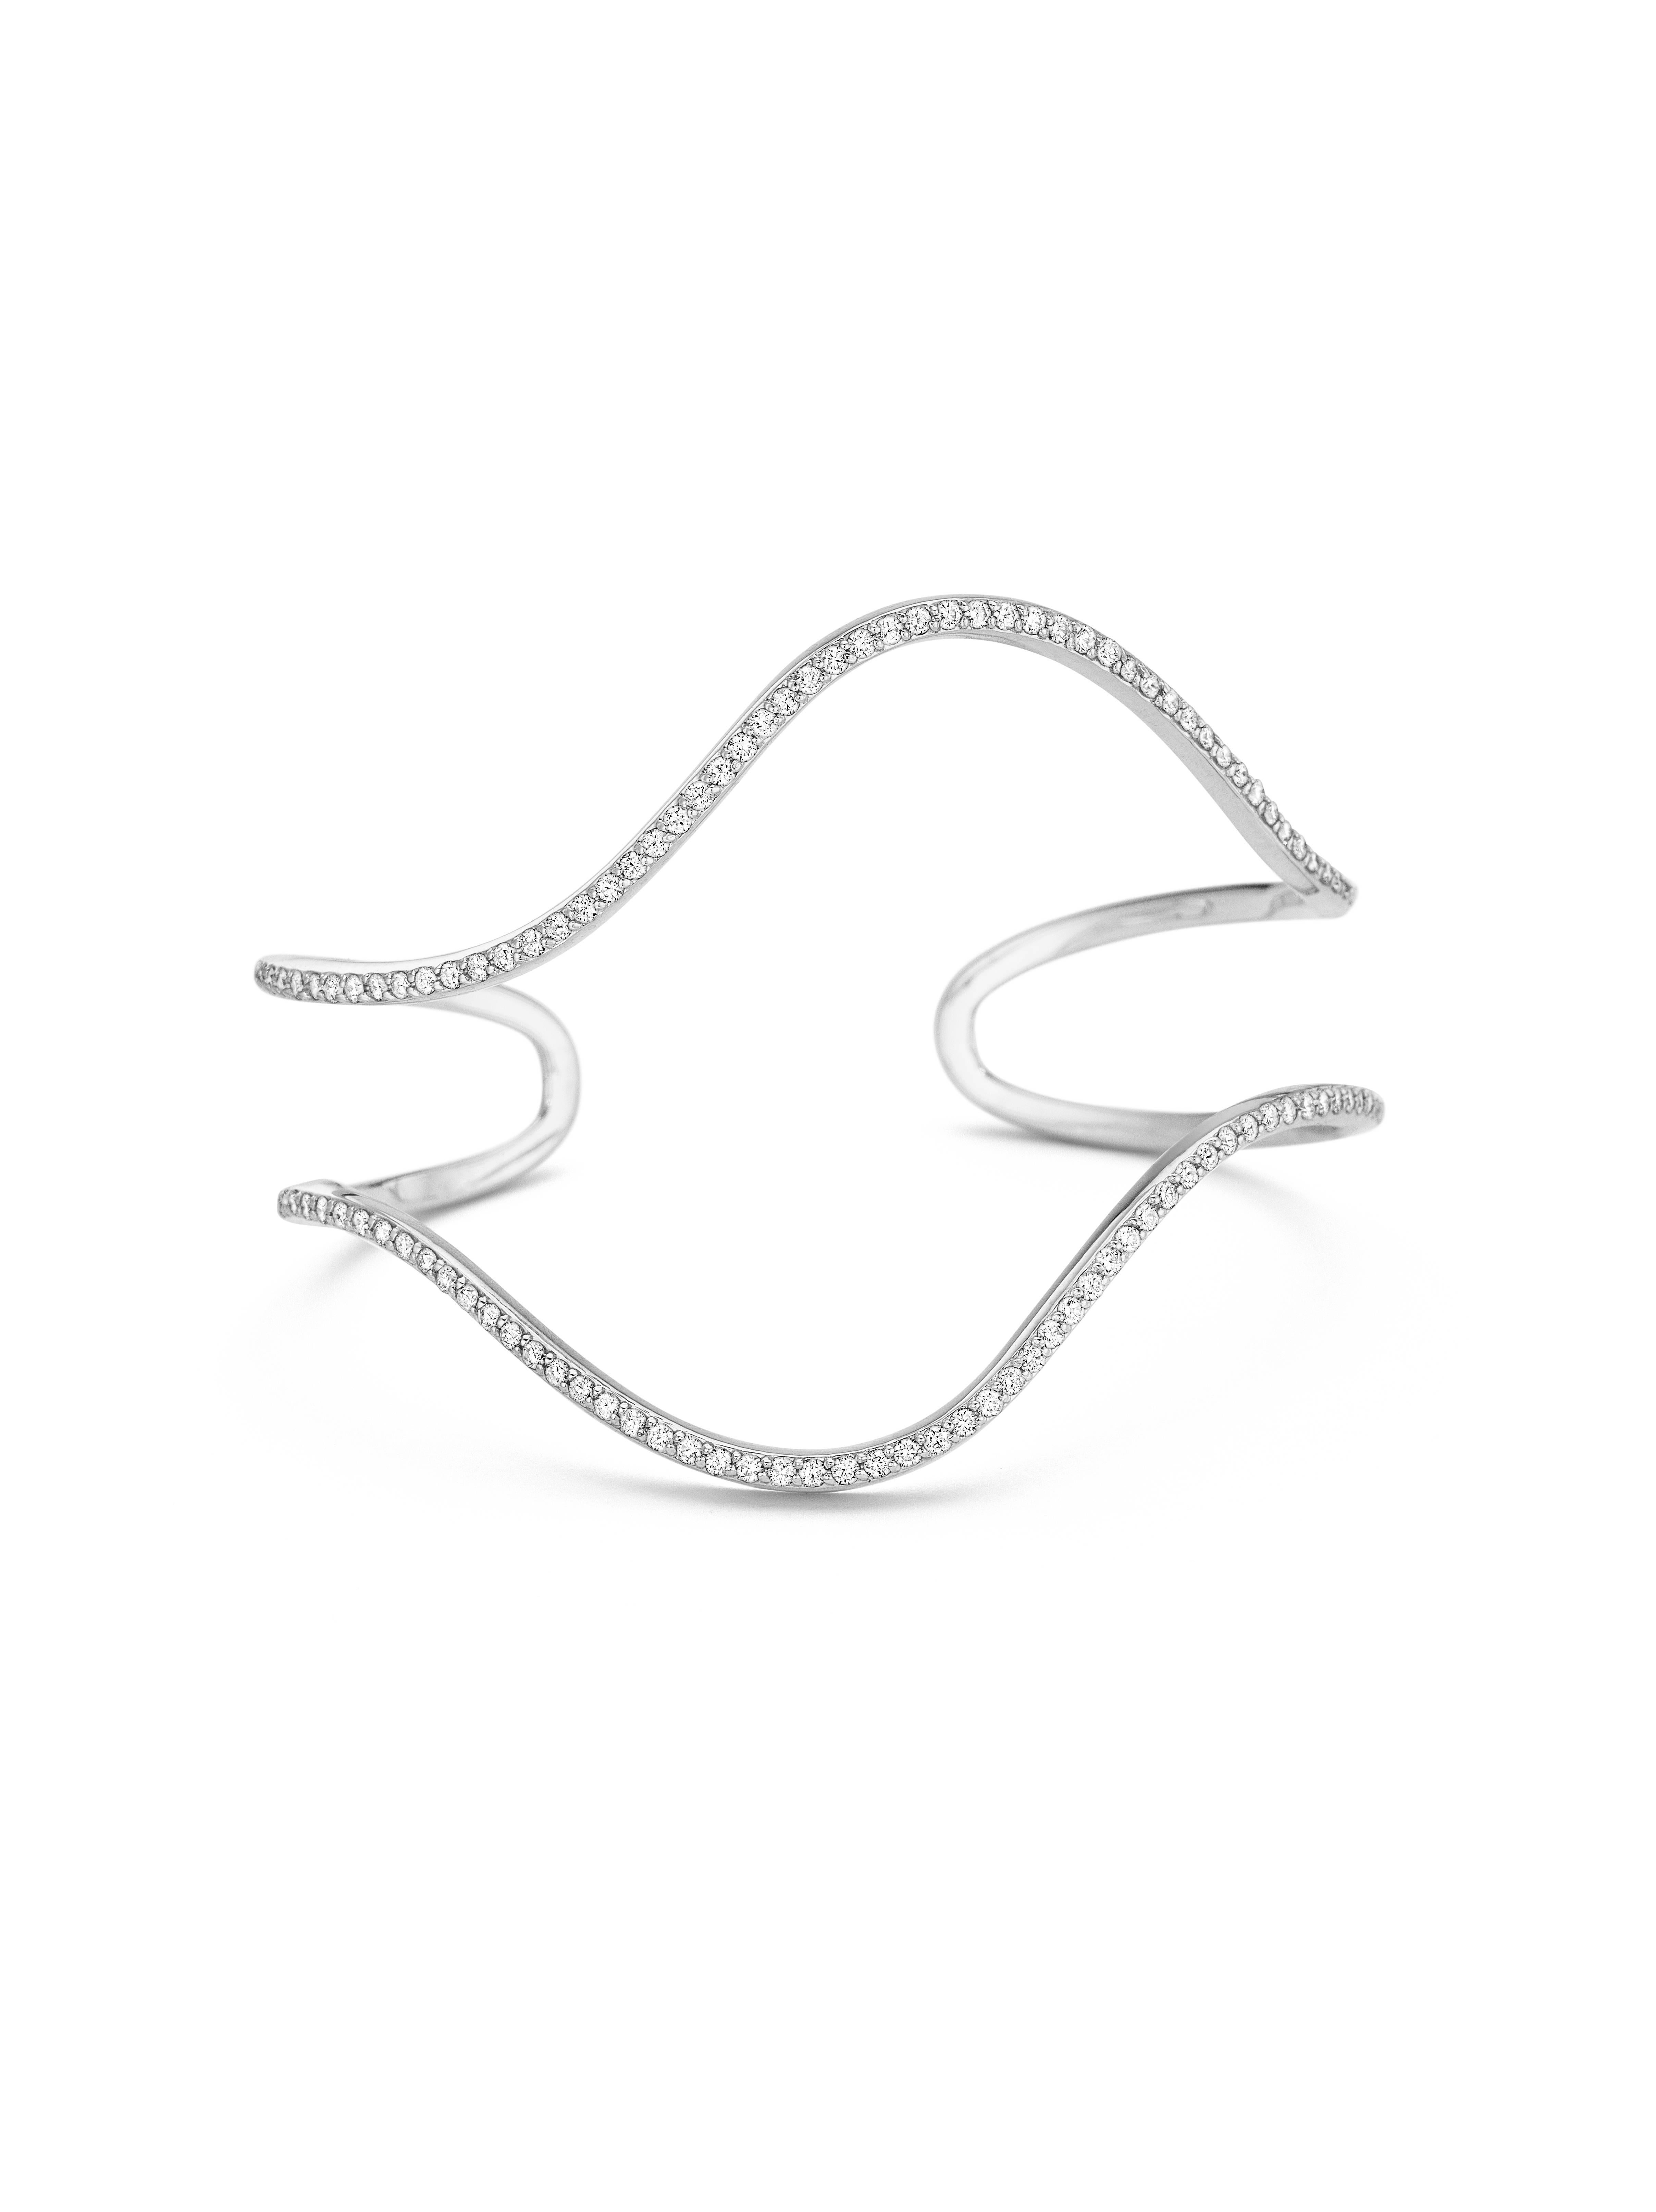 This diamond statement cuff is both elegant and chic, designed to take you from day to night. Made of 18k gold and 1.43 carat of diamonds, sculptural lines create a subtle wave effect. This unique cuff is part of a limited edition collection and